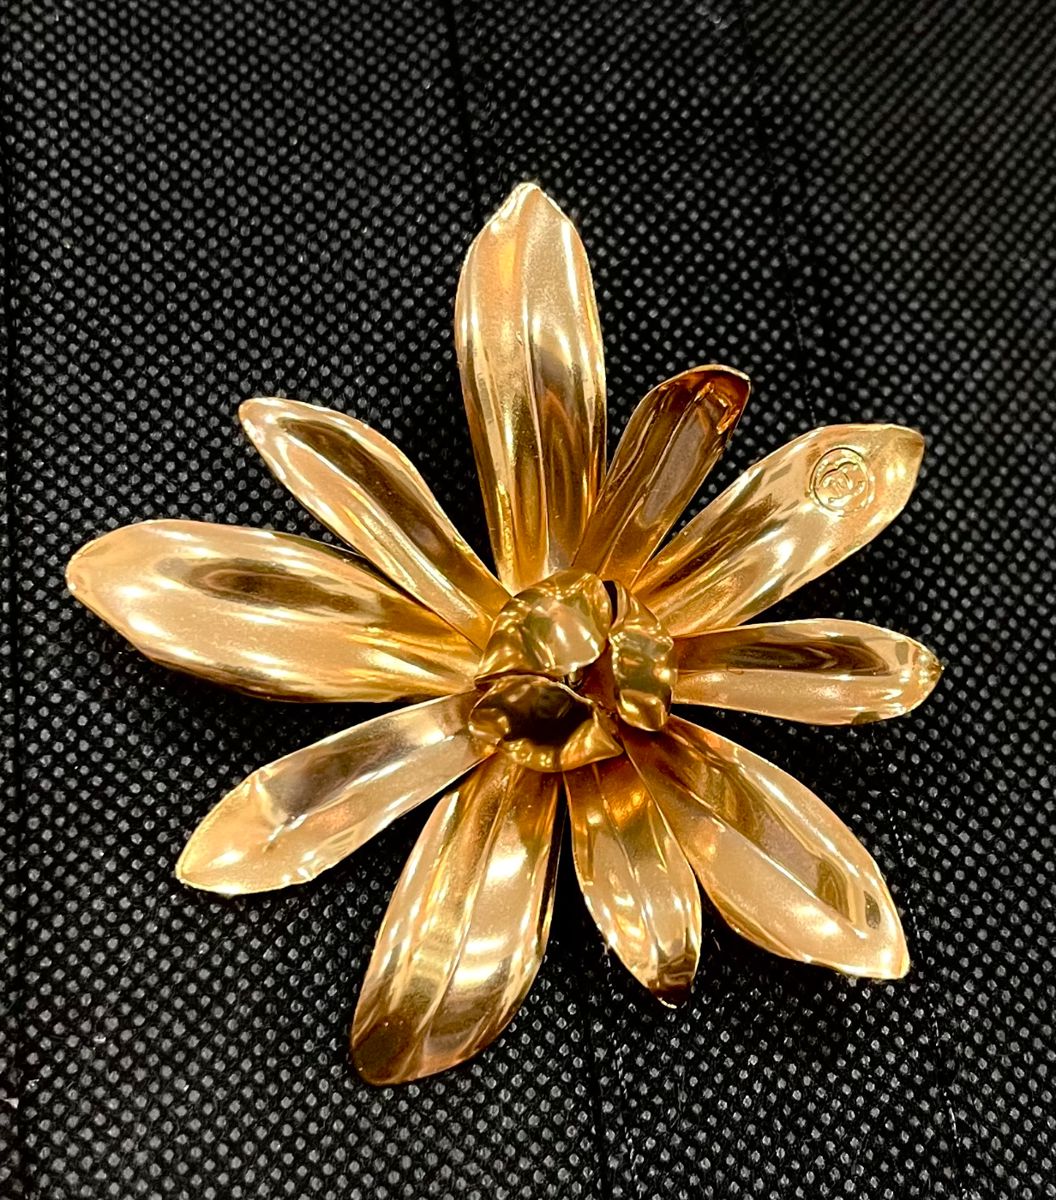 Chanel. This gold-tone sublimage brooch truly is beautiful.